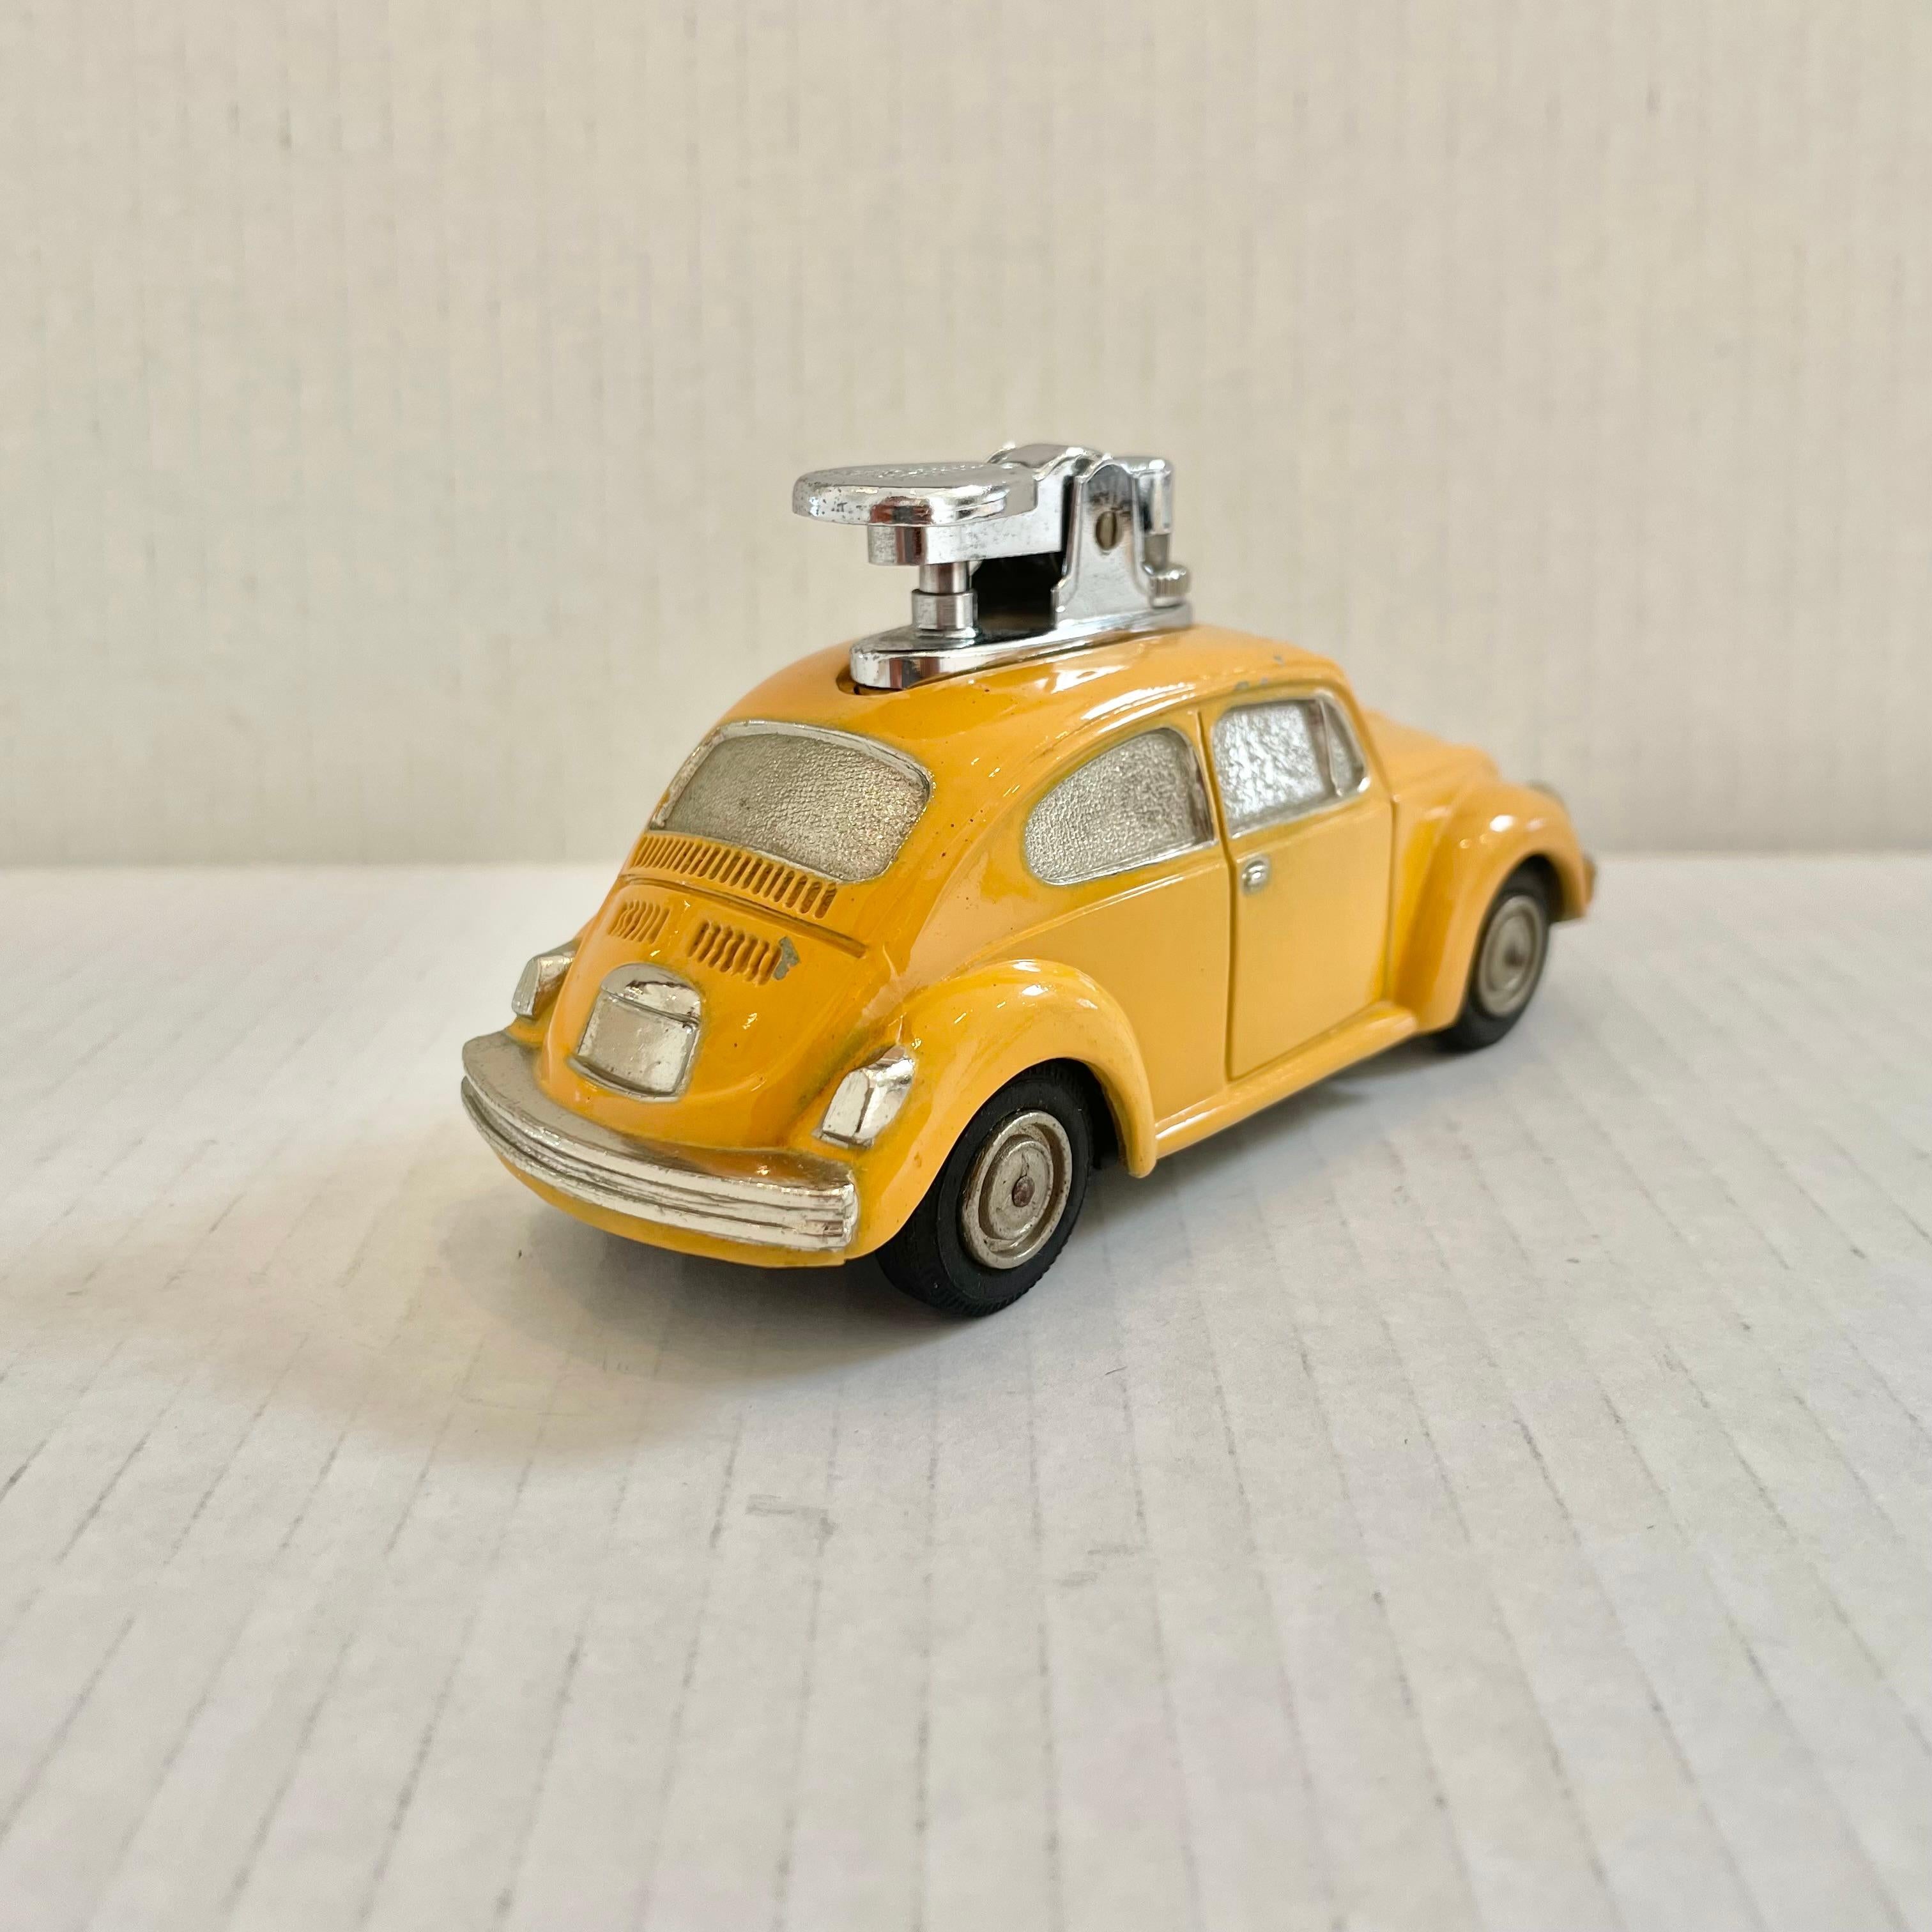 Fun vintage table lighter in the shape of a Volkswagen Beetle. Made completely of metal with a hollow body and painted in a classic taxi cab yellow. Great details throughout and finished off with thin rubber tires. Cool tobacco accessory and